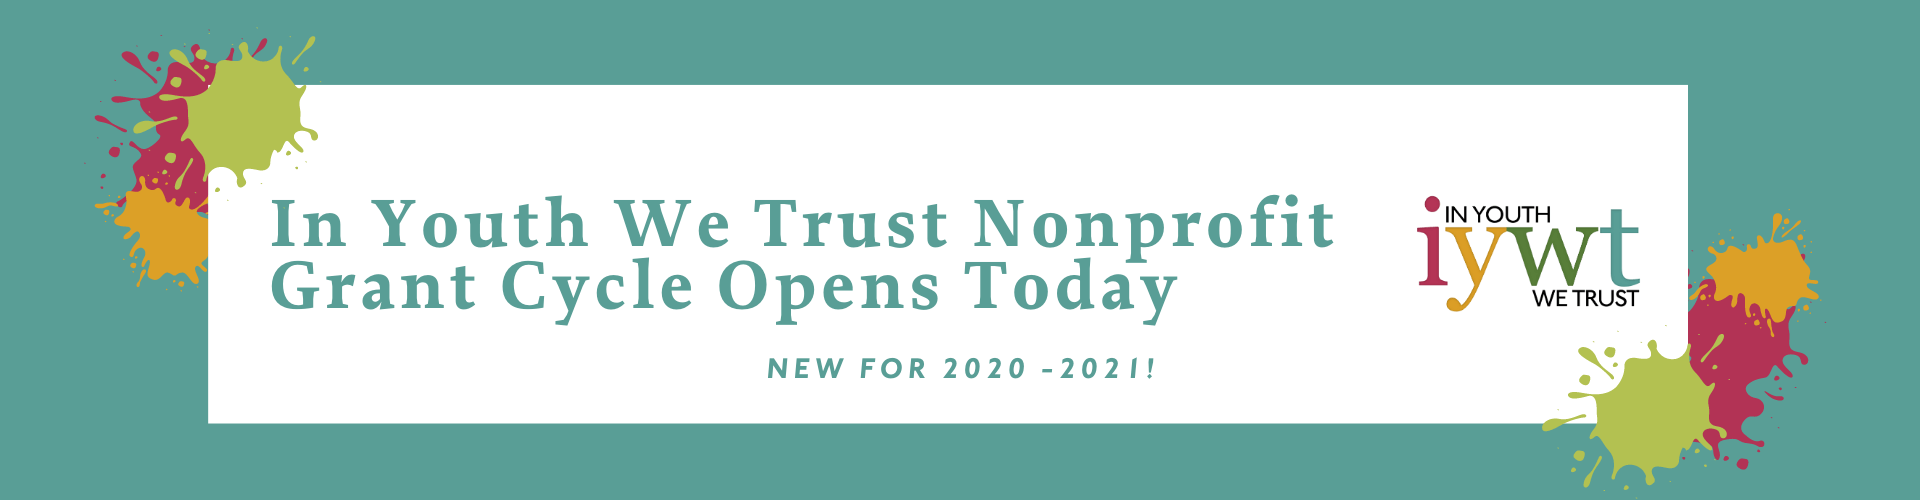 In Youth We Trust Nonprofit Grant Cycle Opens Today. In Youth We Trust logo